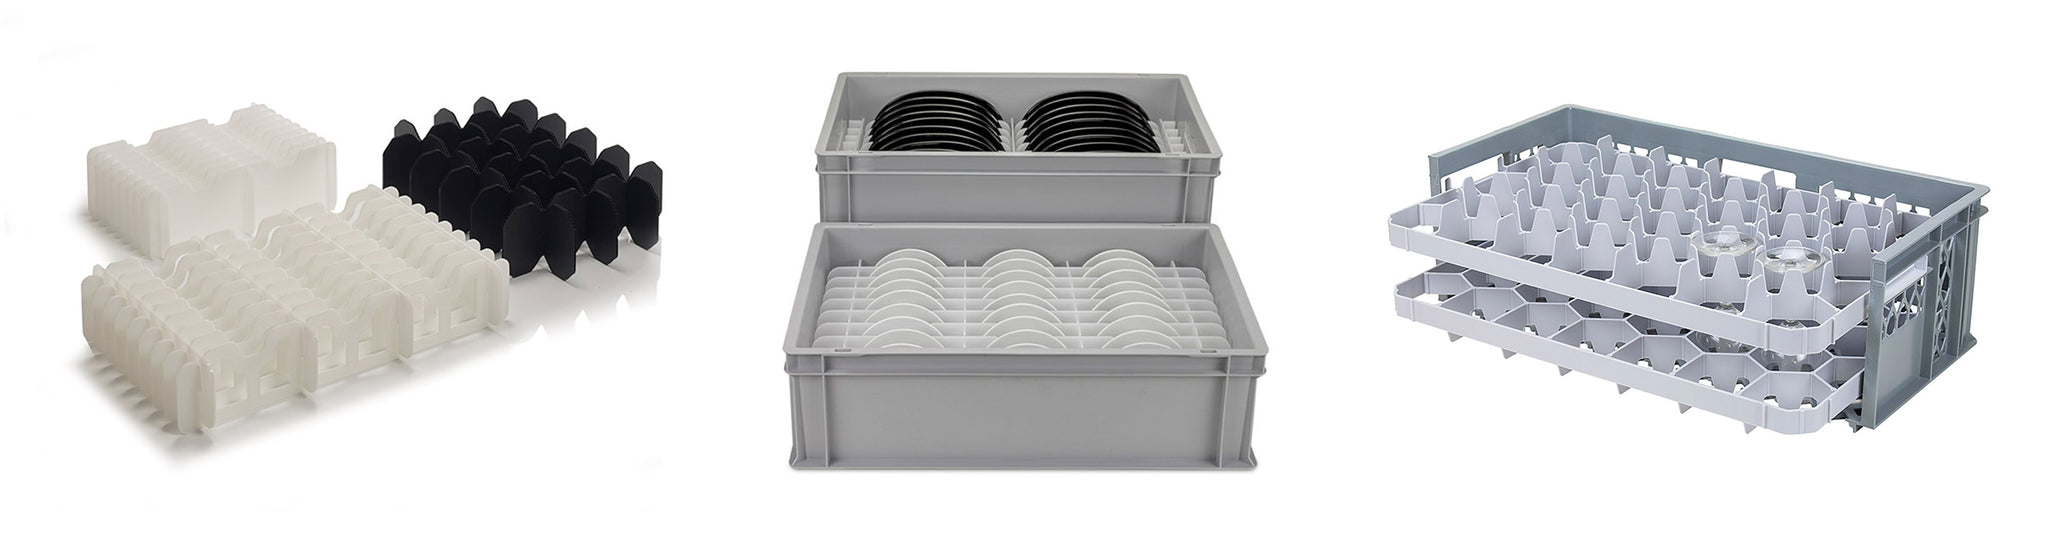 PLASTIC BOX DIVIDERS AND INSERTS - FROM STORAGE BOX SHOP